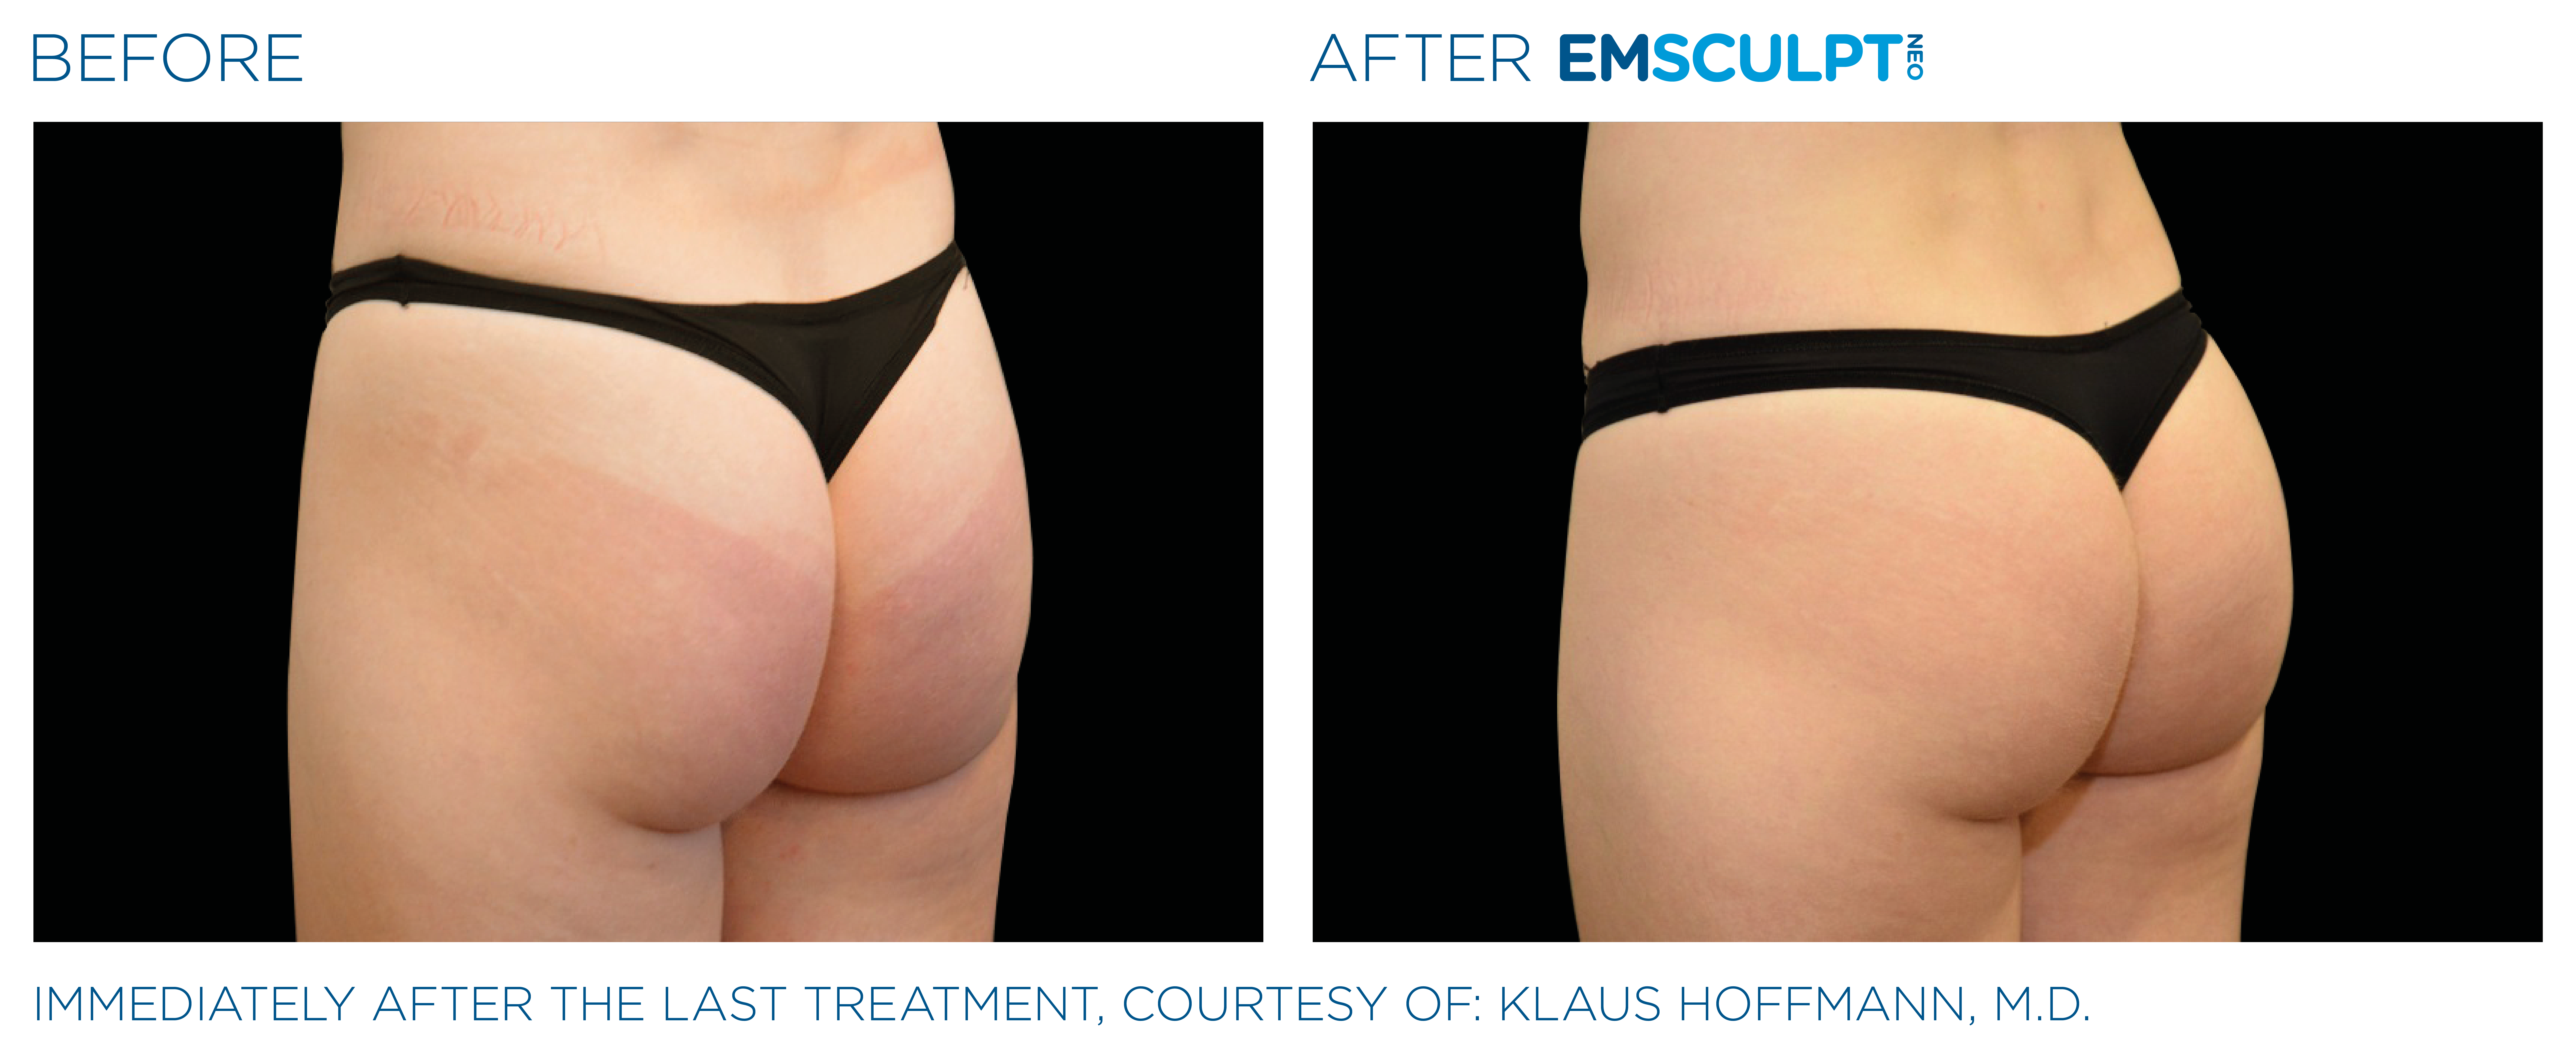 Before and after photo of womans buttocks with added text that states: Before on the left, After on the right. Immediately after the last treatment, courtesy of: Klaus Hoffman, M.D.